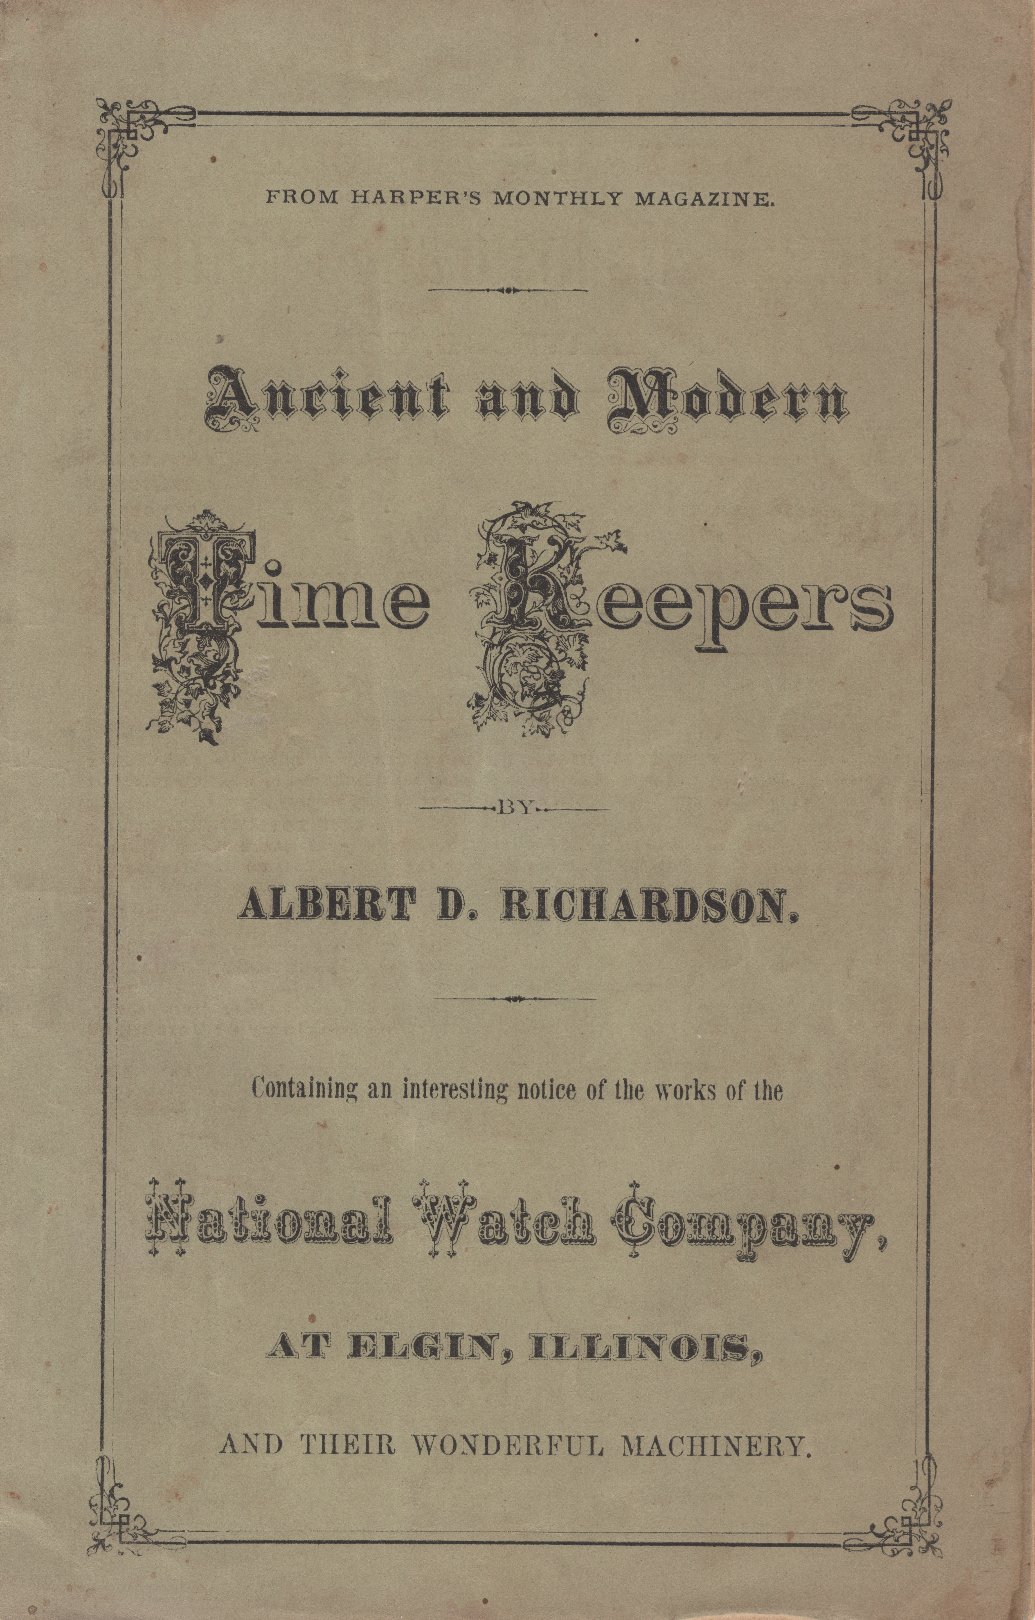 Ancient and Modern Time Keepers: Containing Interesting Notice of the Works of the National Watch Company at Elgin, Illinois and Their Wonderful Machinery (c.1869) Cover Image